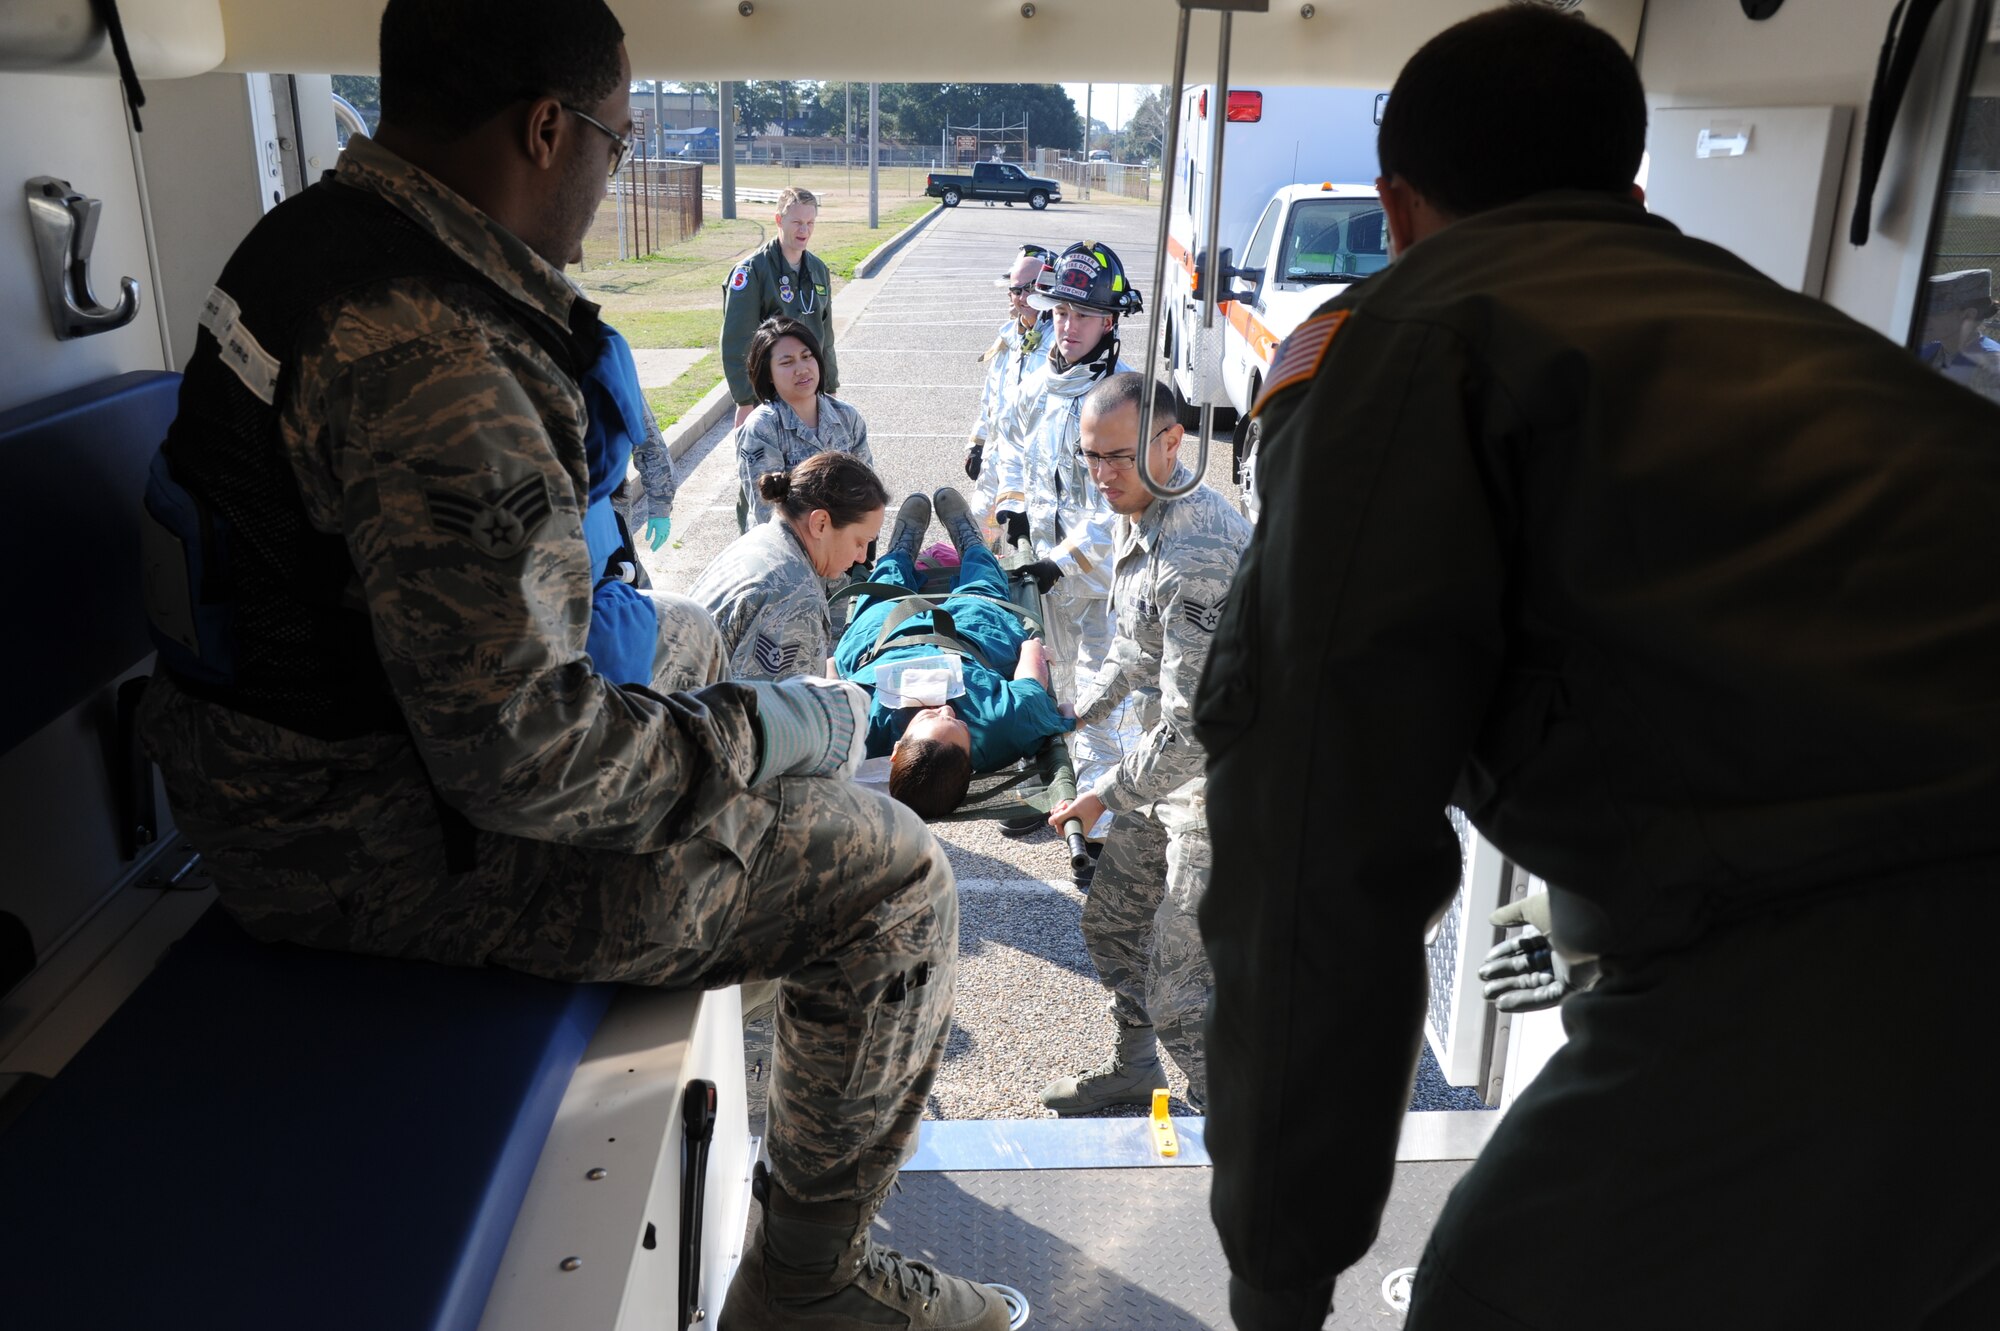 First responders  work together to load a “victim” into an ambulance during a major accident response exercise Feb. 12, 2015, on the flight line, Keesler Air Force Base, Miss.  The MARE simulated a C-130J Hercules aircraft crash on base. The exercise was held to test the readiness of Keesler personnel during a major accident.  (U.S. Air Force photo by Kemberly Groue)